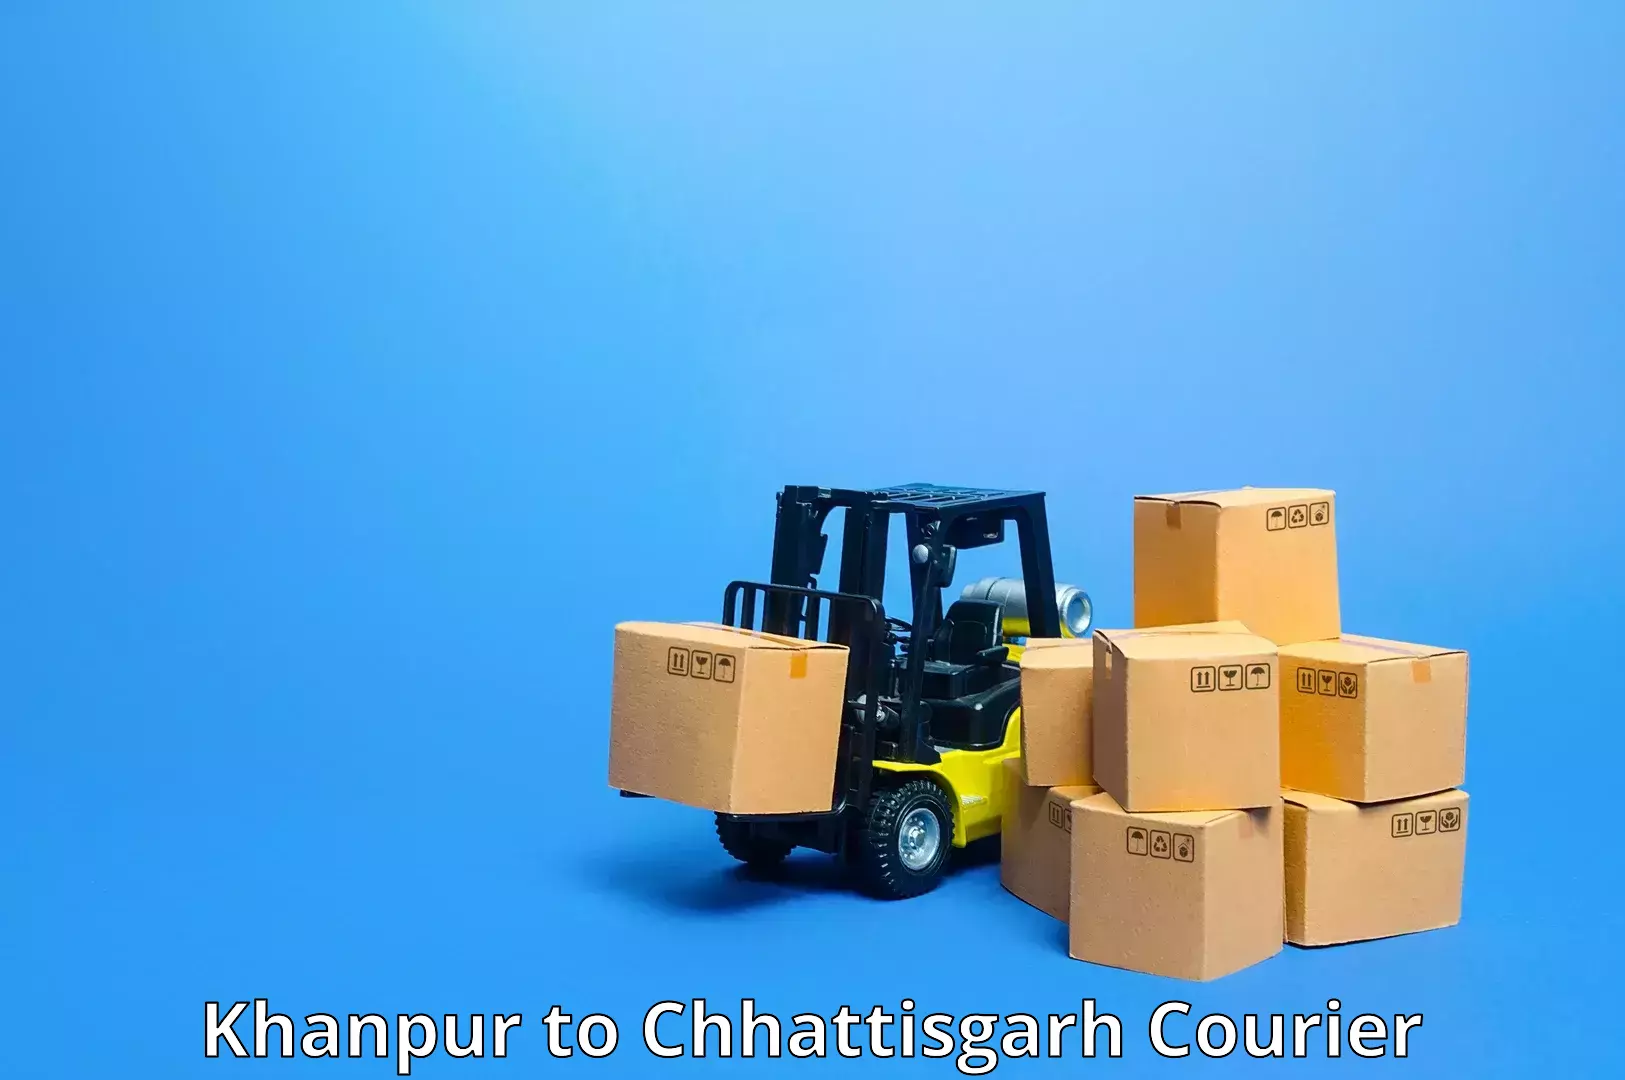 Advanced tracking systems Khanpur to Dhamtari